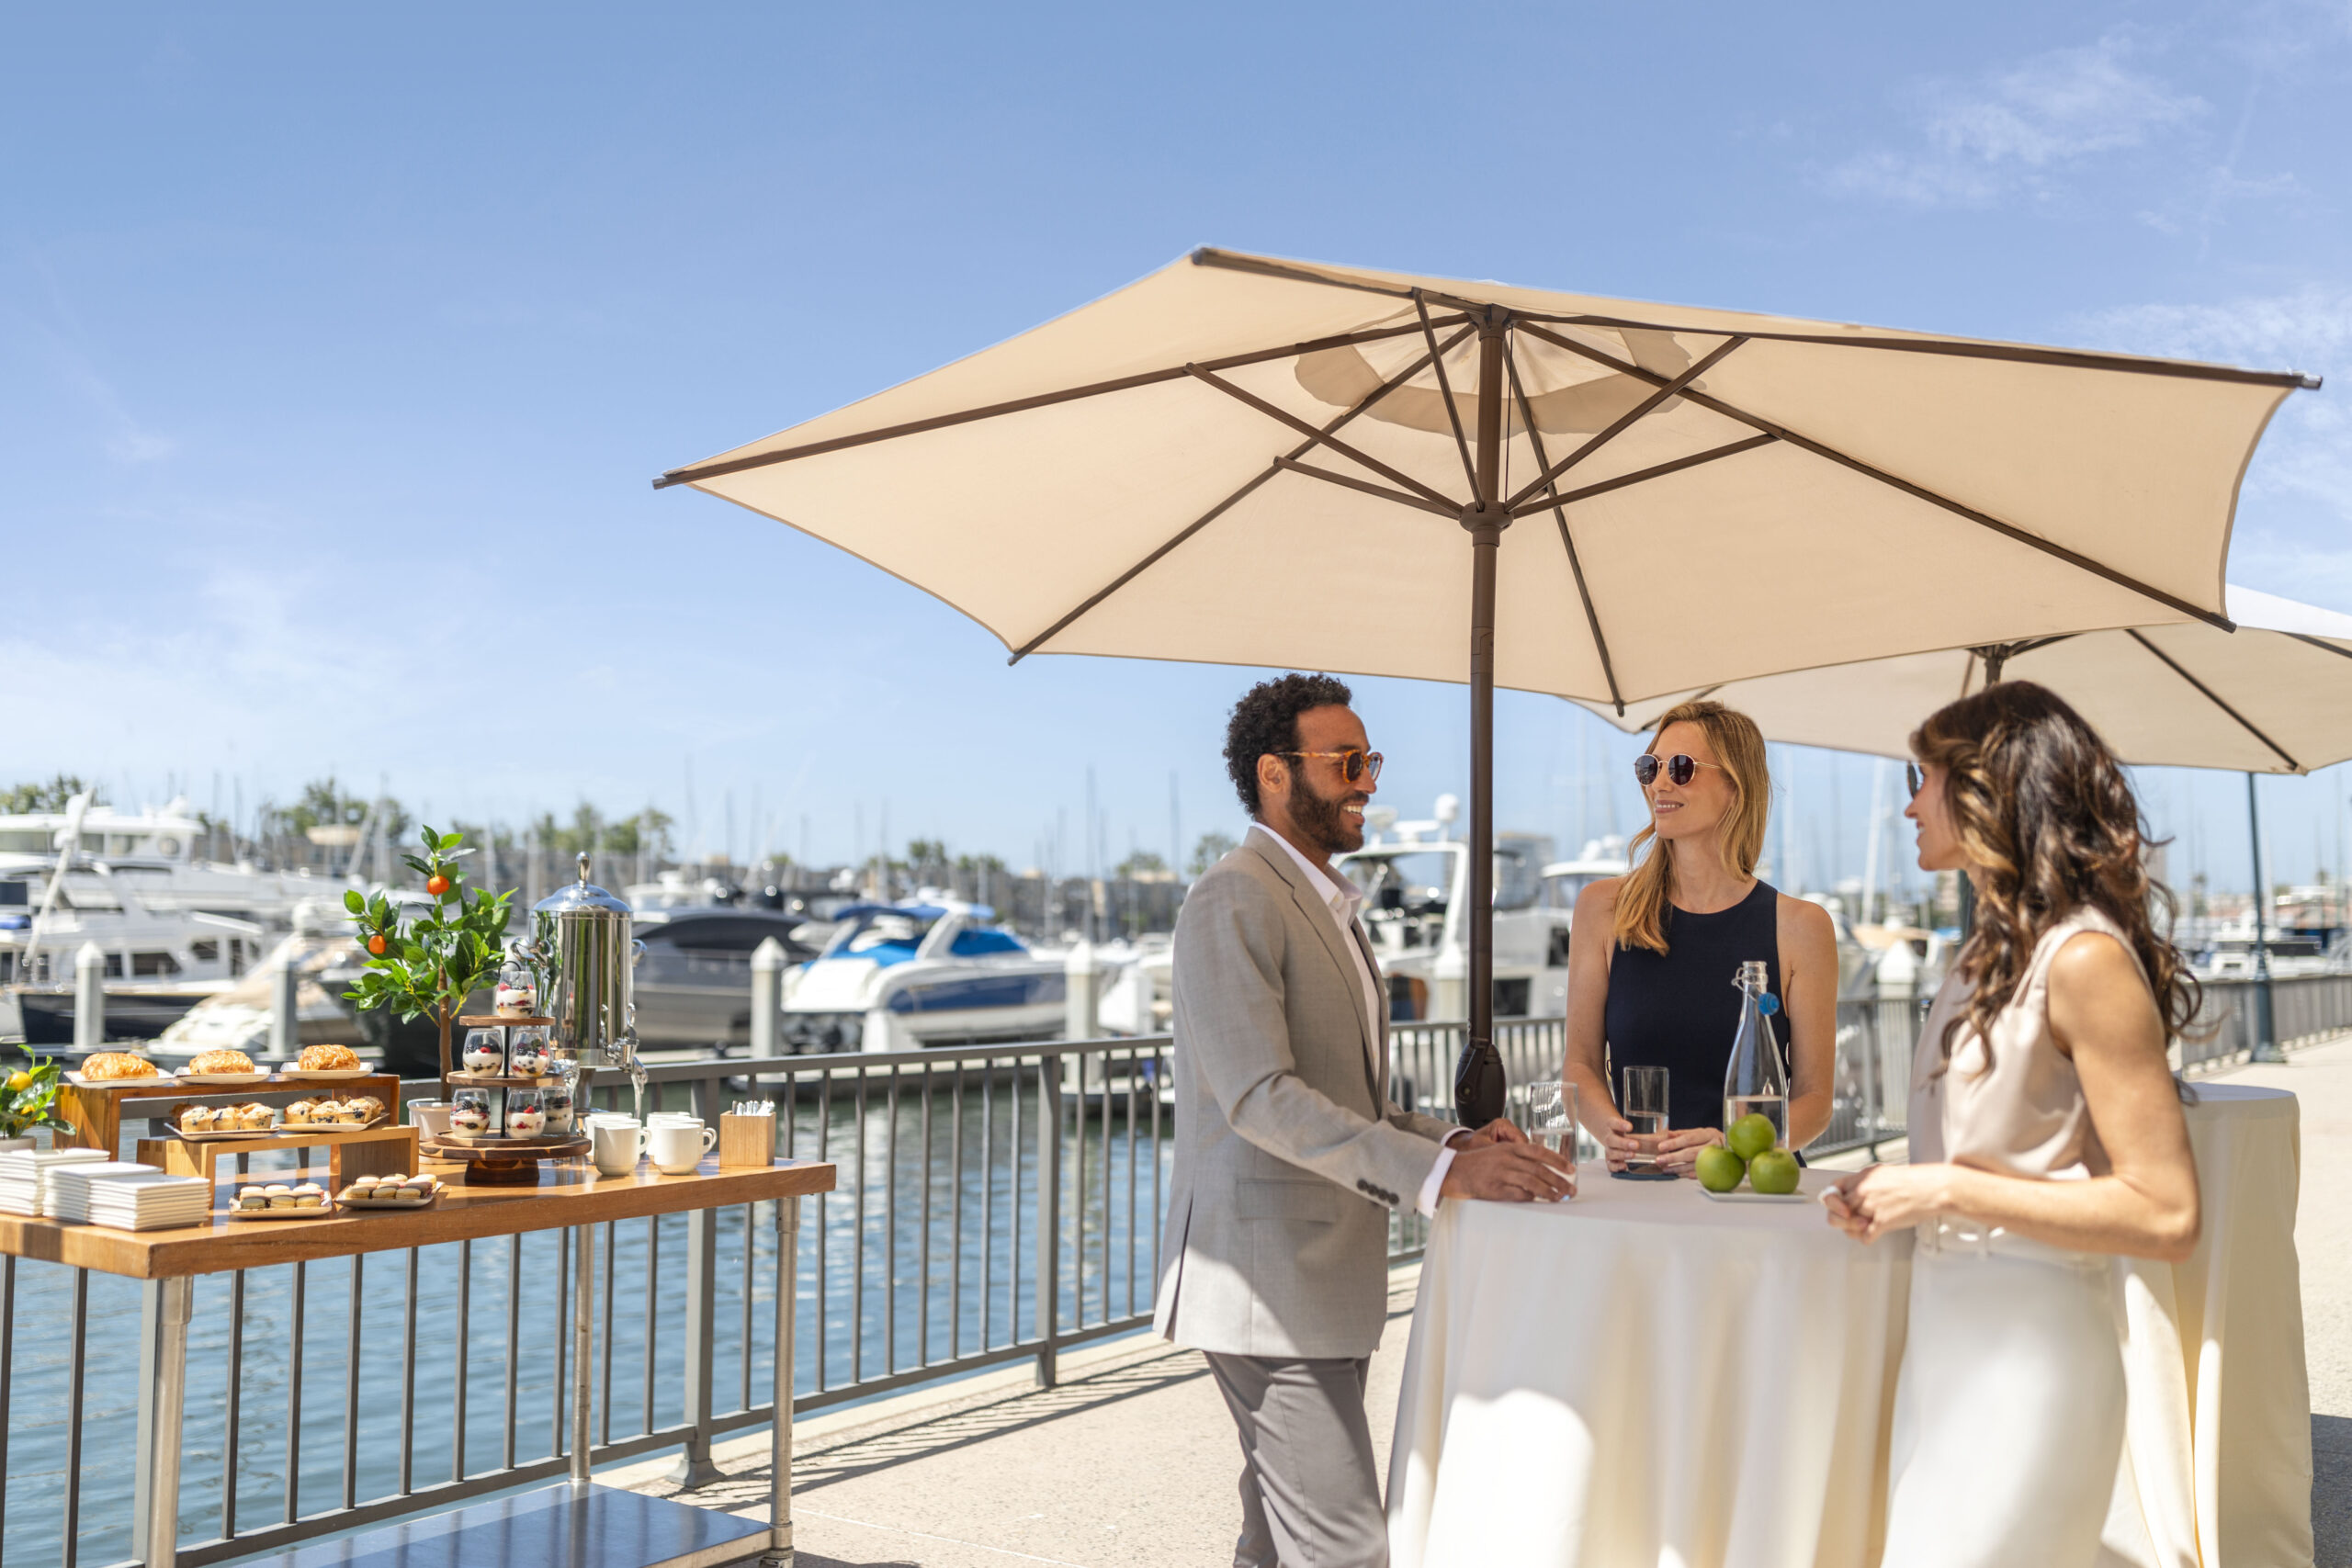 Group business meeting break under umbrella with snacks next to the harbor and boats